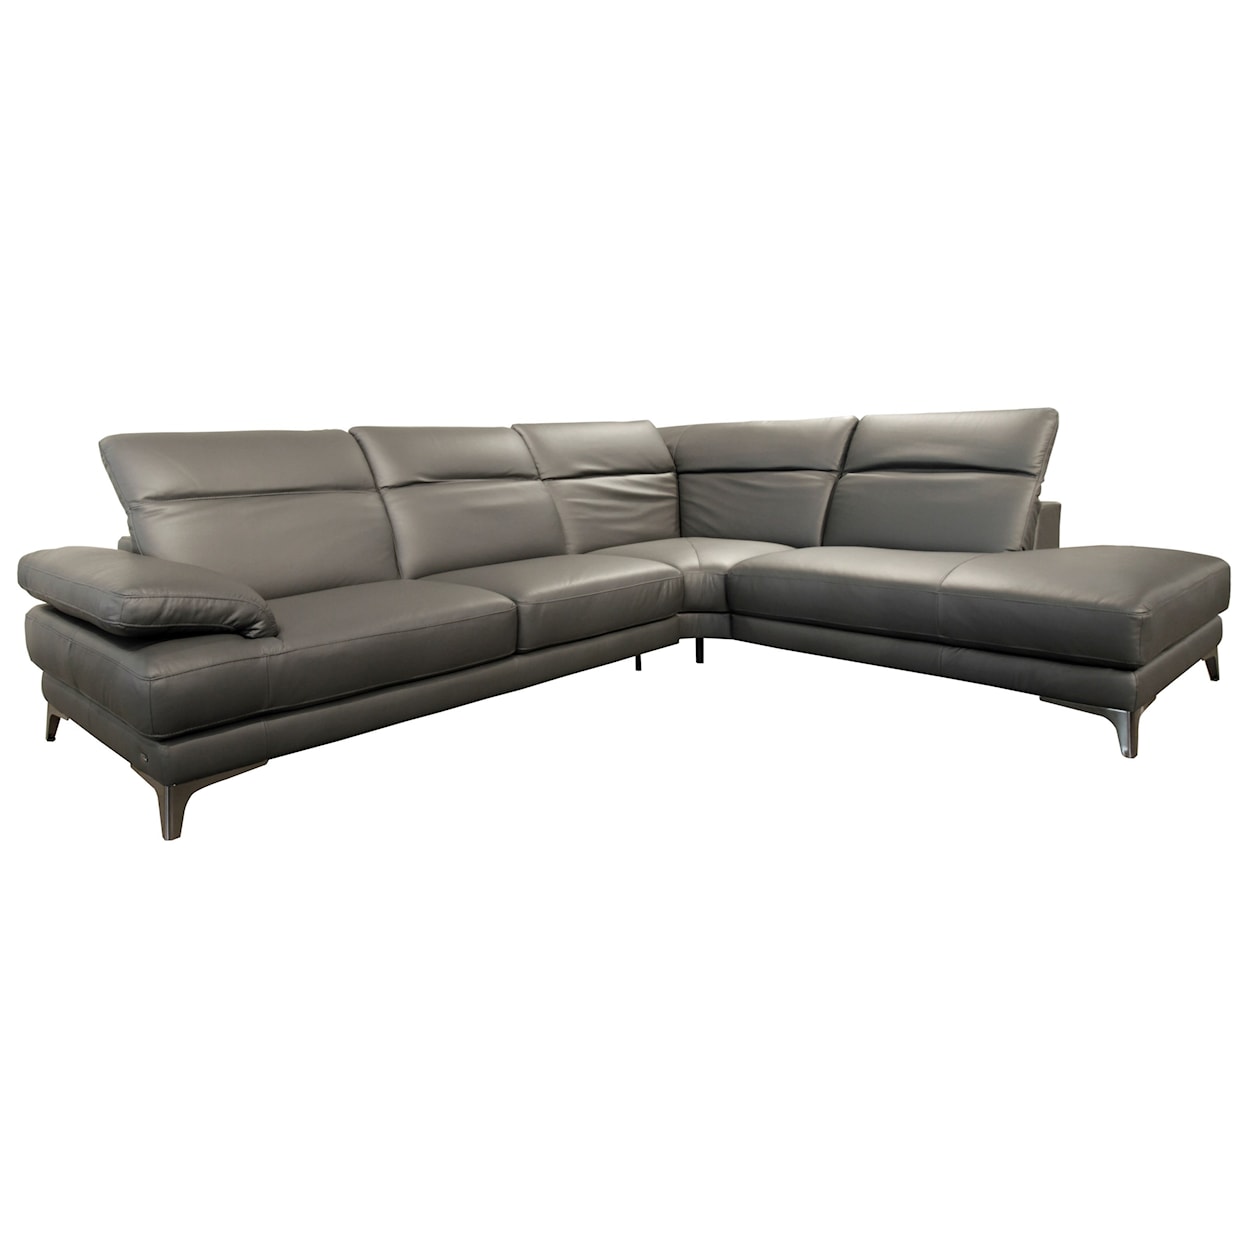 Natuzzi Editions 100% Italian Leather 3 Piece Sectional with RAF Chaise